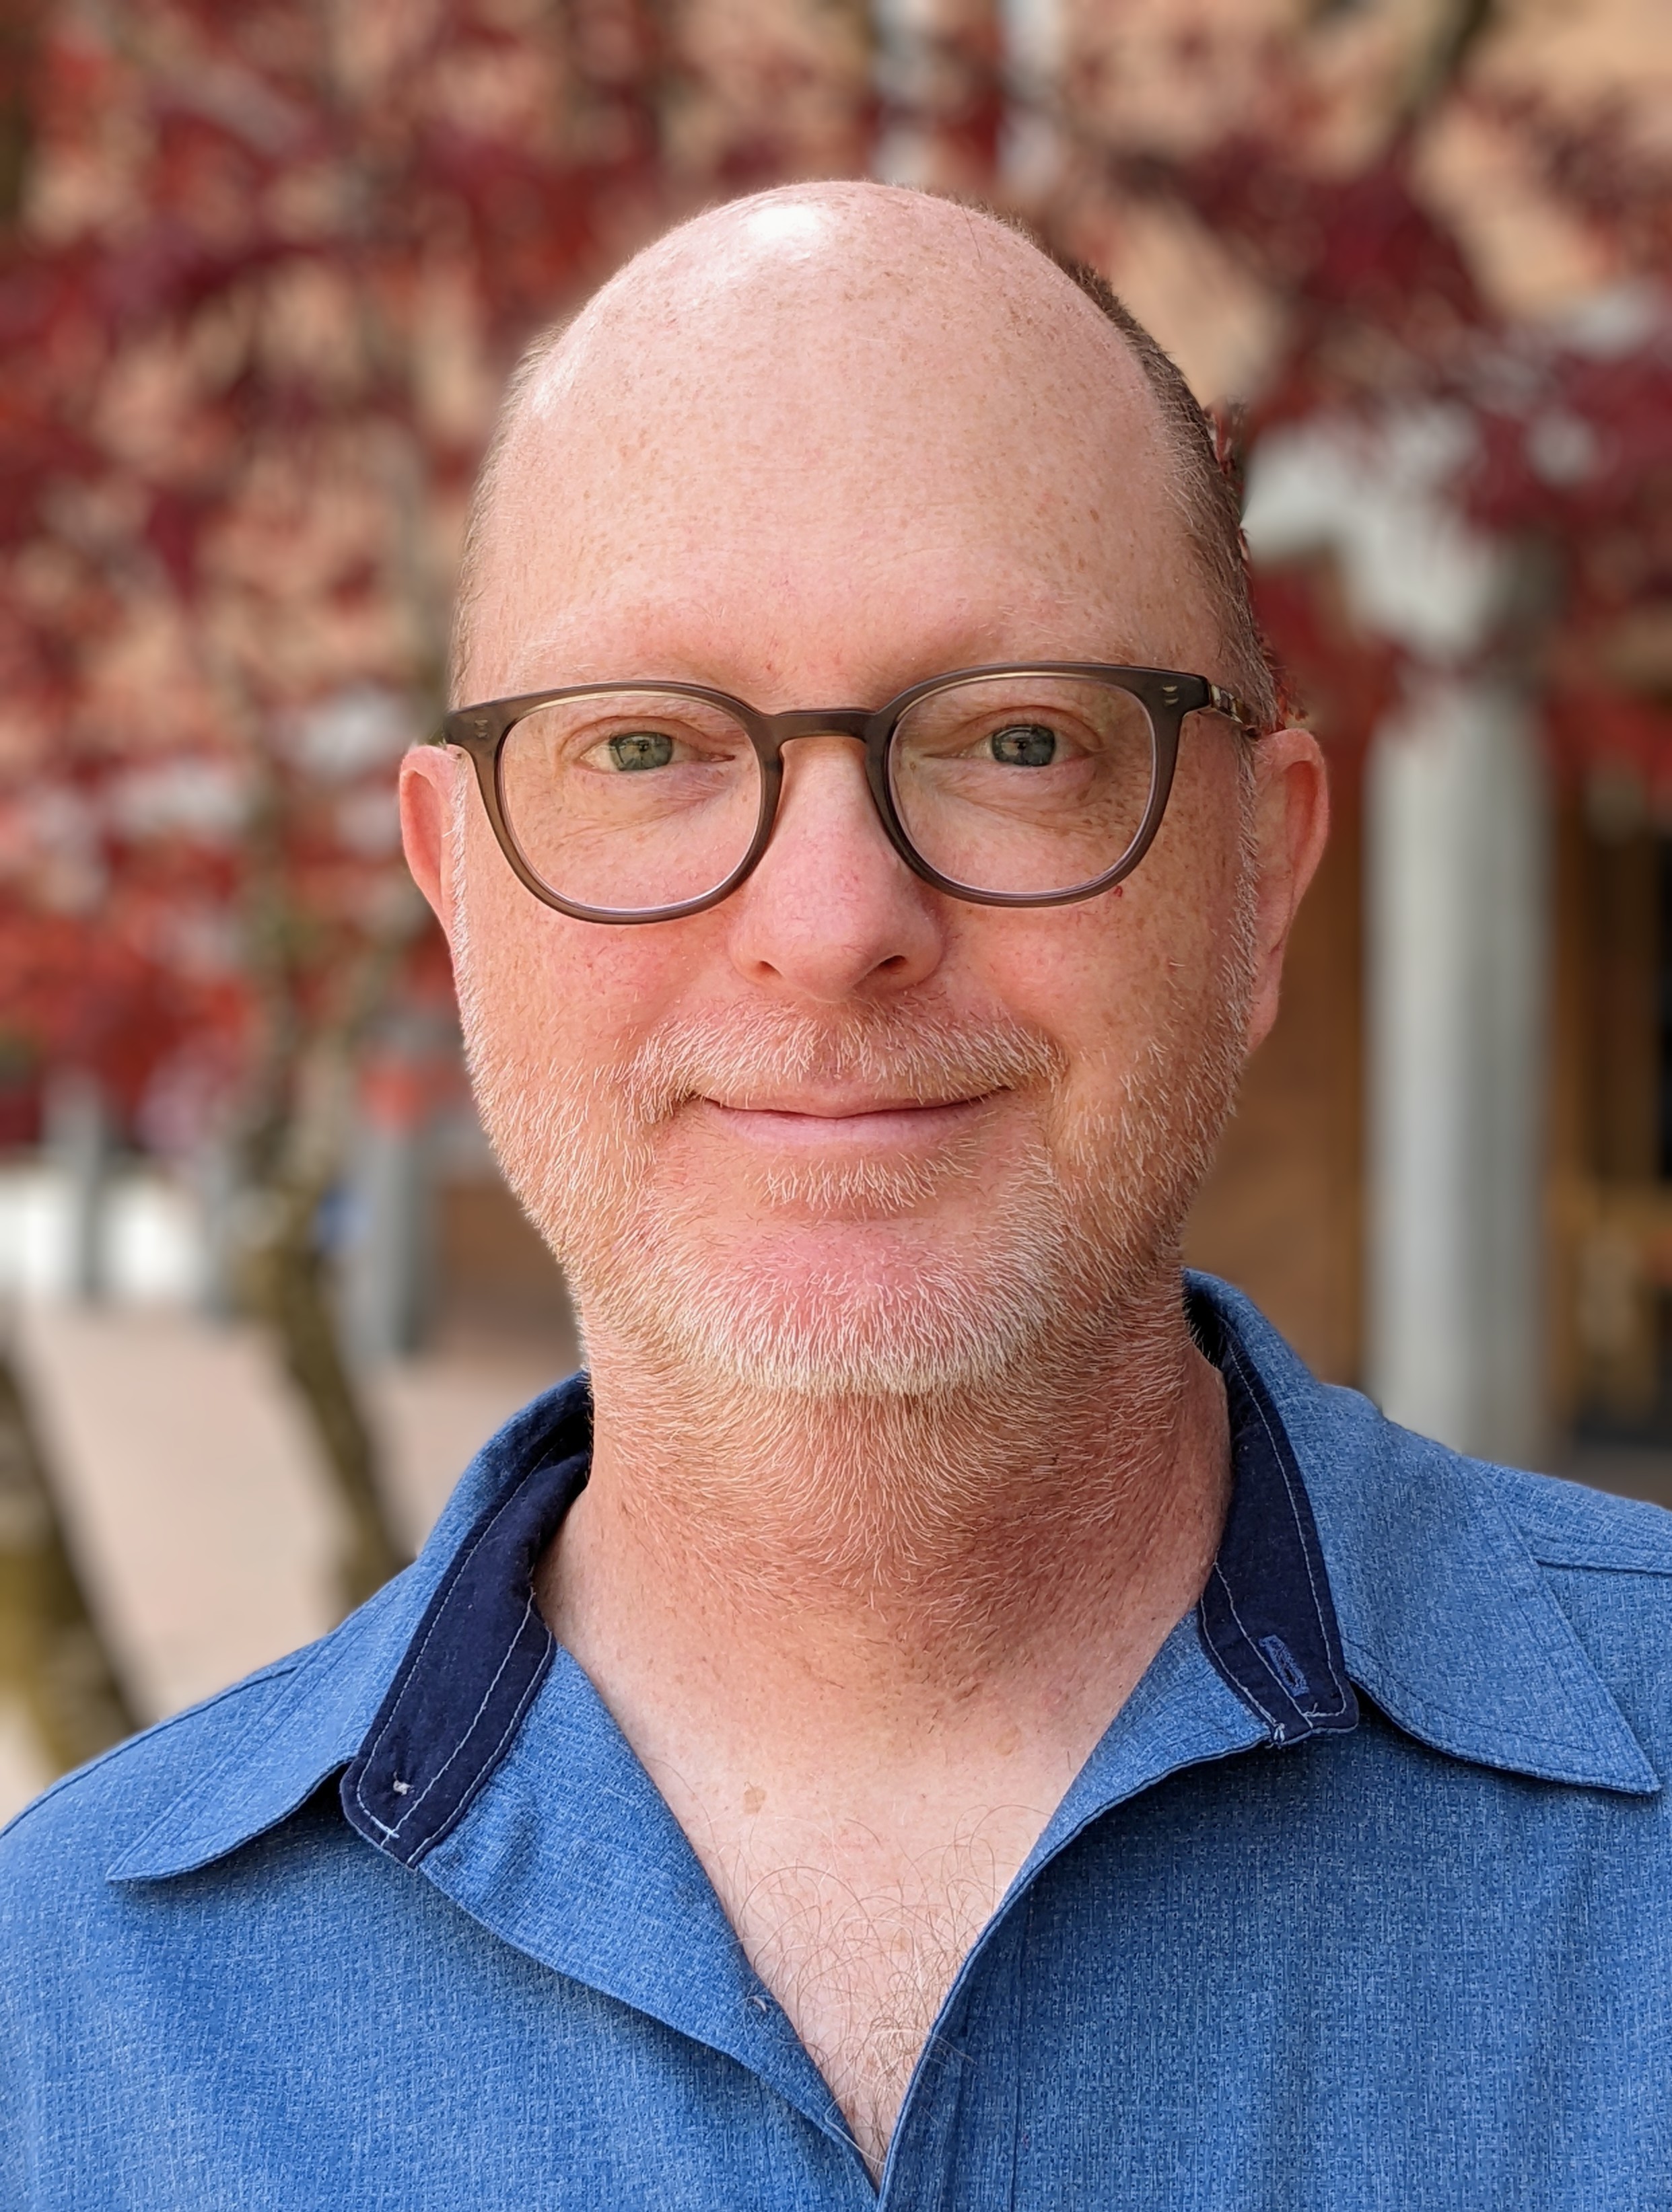 portrait of Jeff Grimm with glasses on, wearing blue shirt